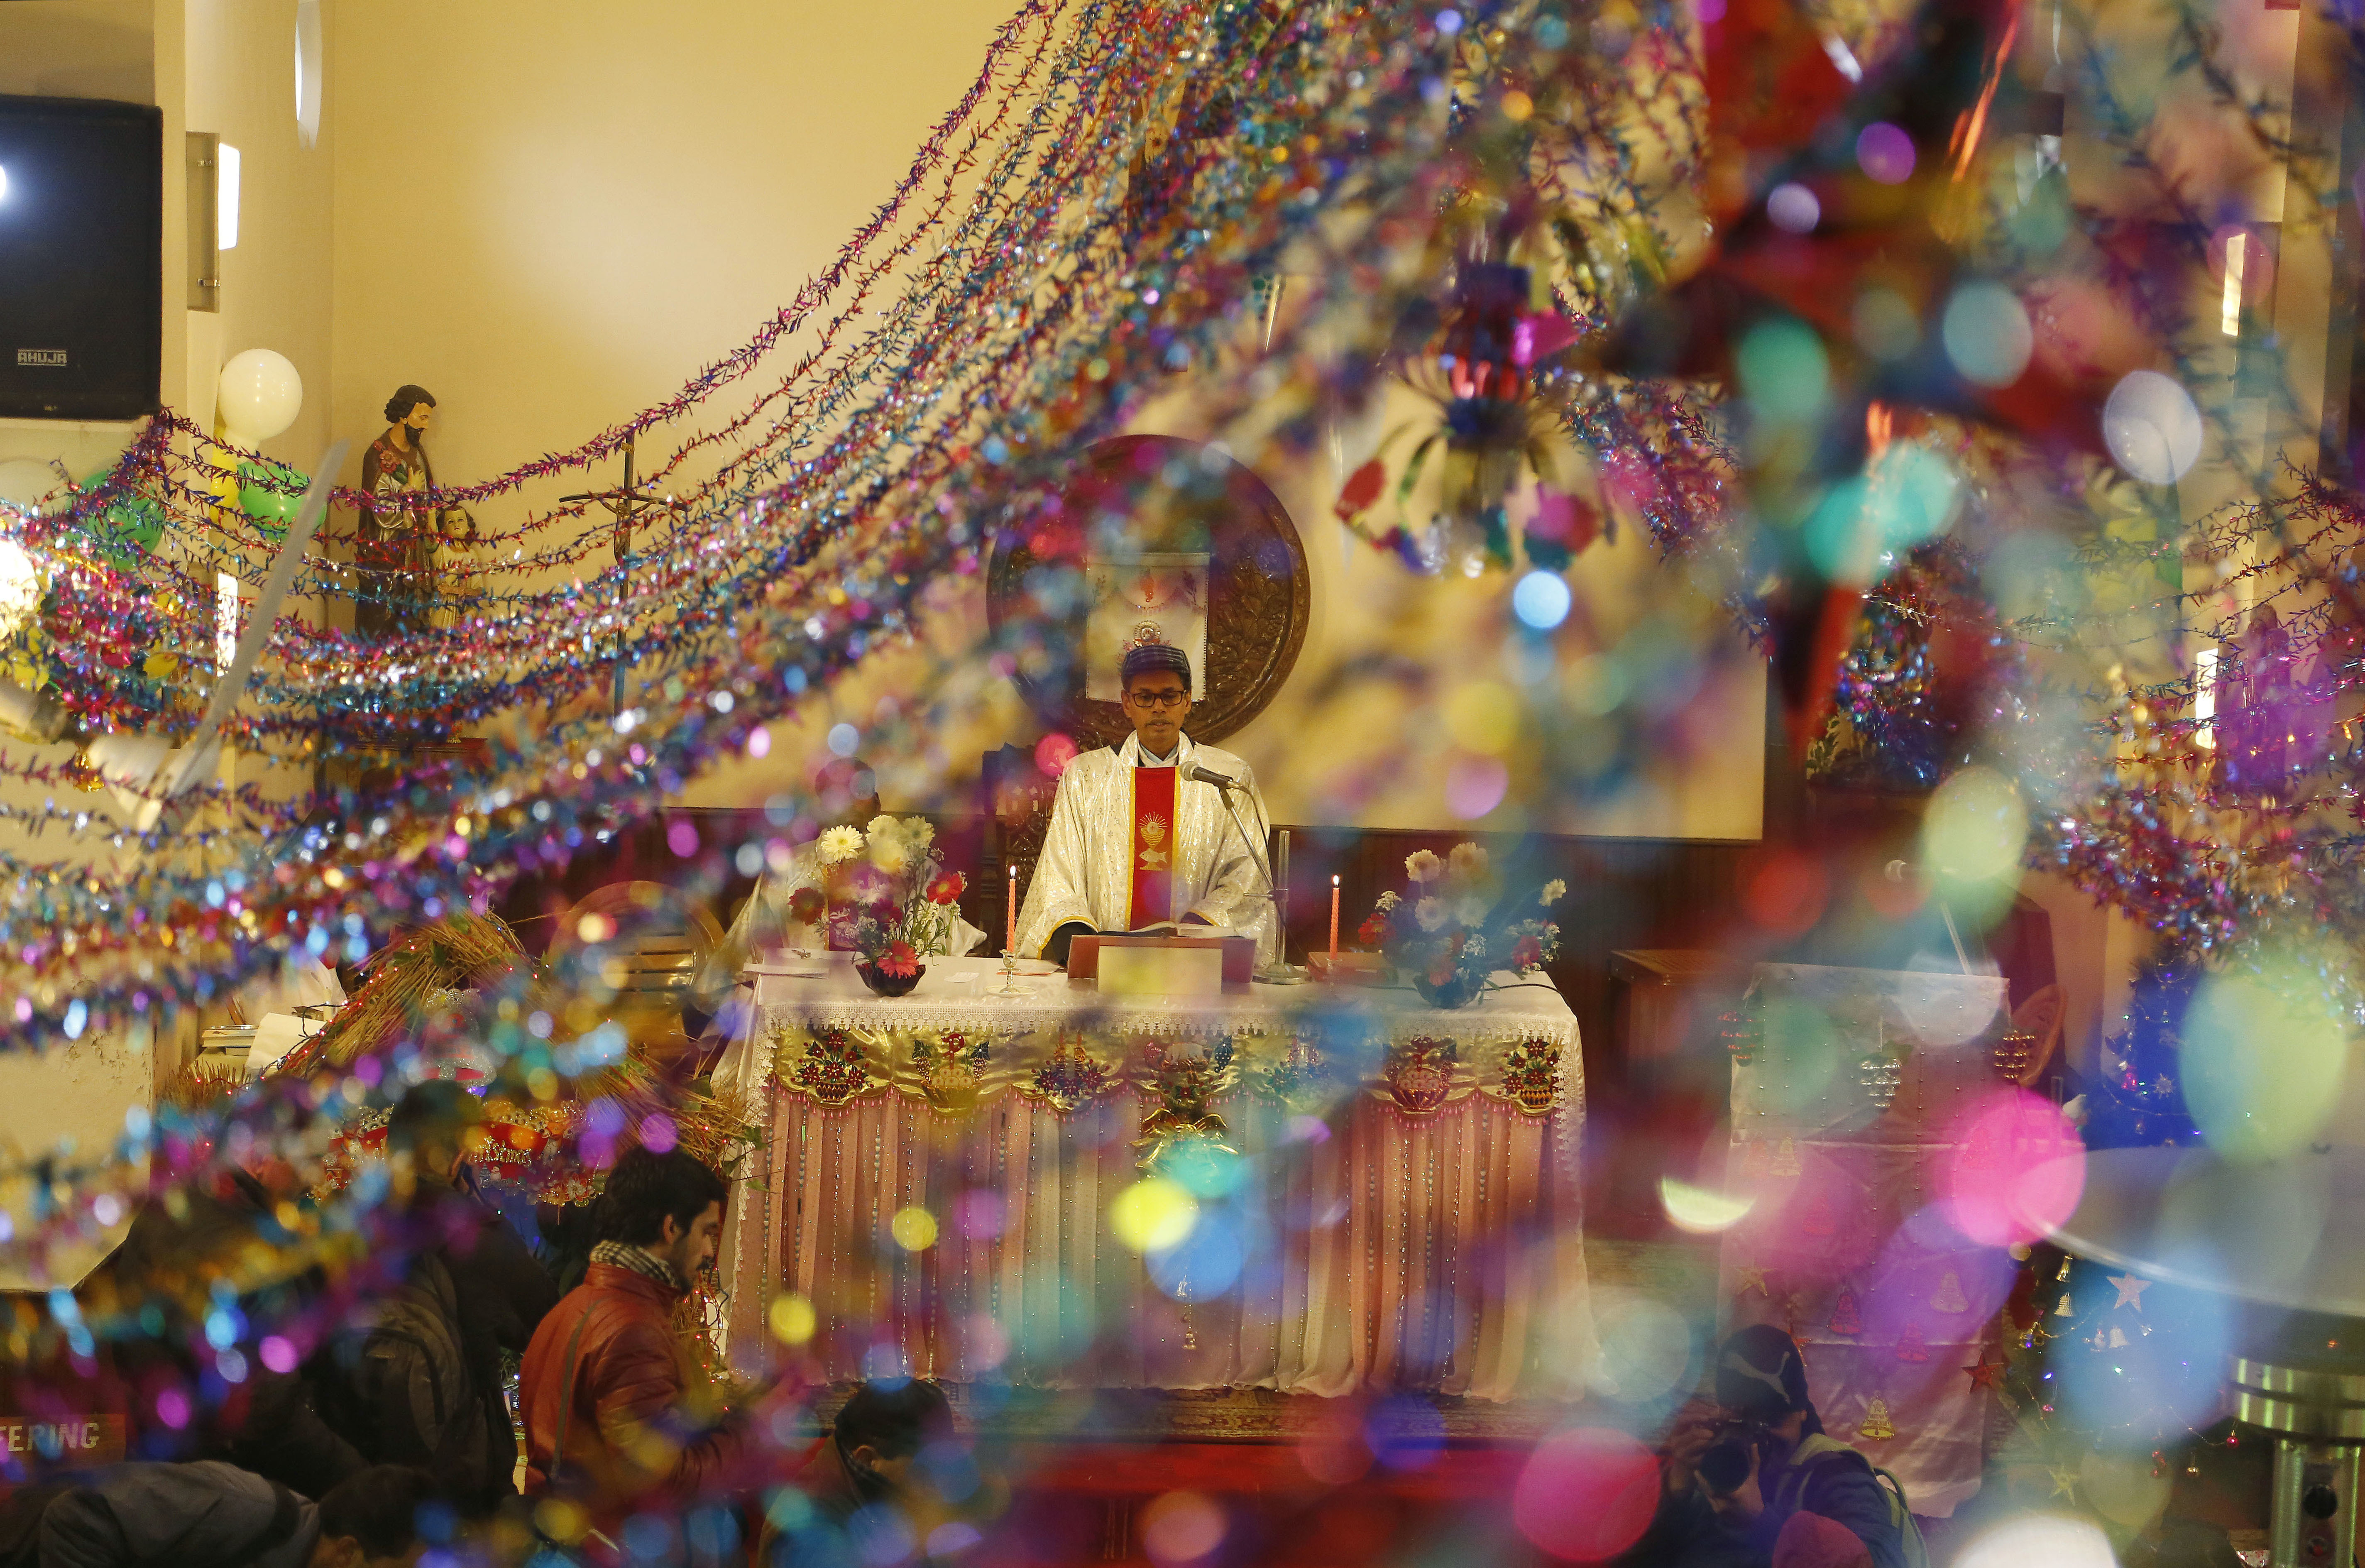 IN PHOTOS: How the world celebrated Christmas | Inquirer News